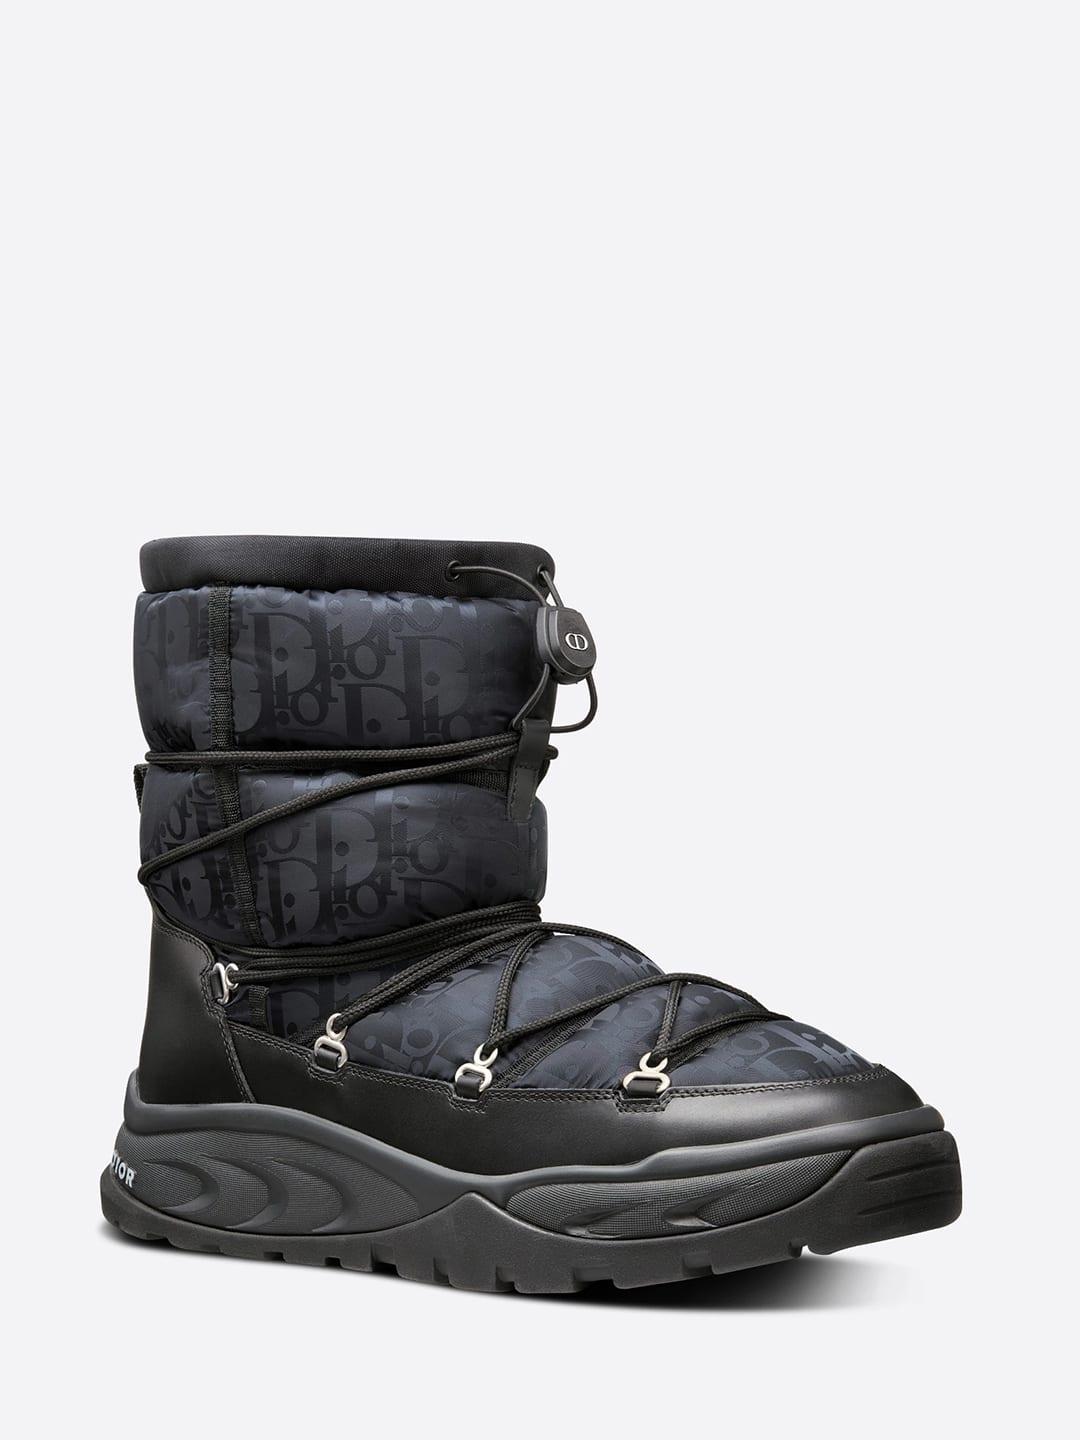 Dior Leather Dior Snow Ankle Boot in Black for Men - Lyst